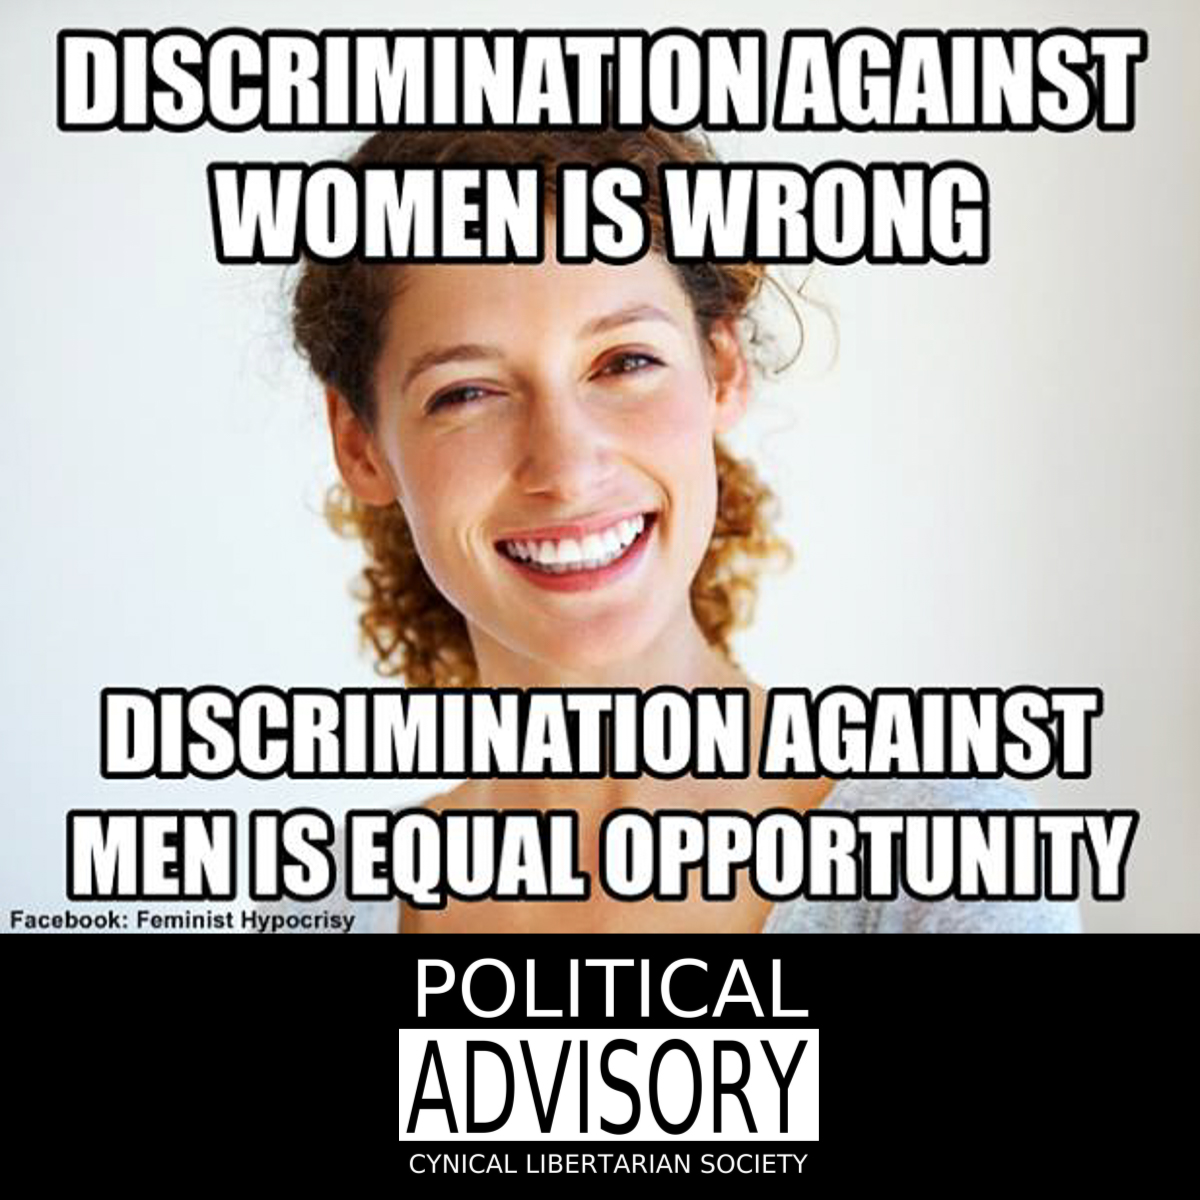 Is discrimination against men real? Can you give any 